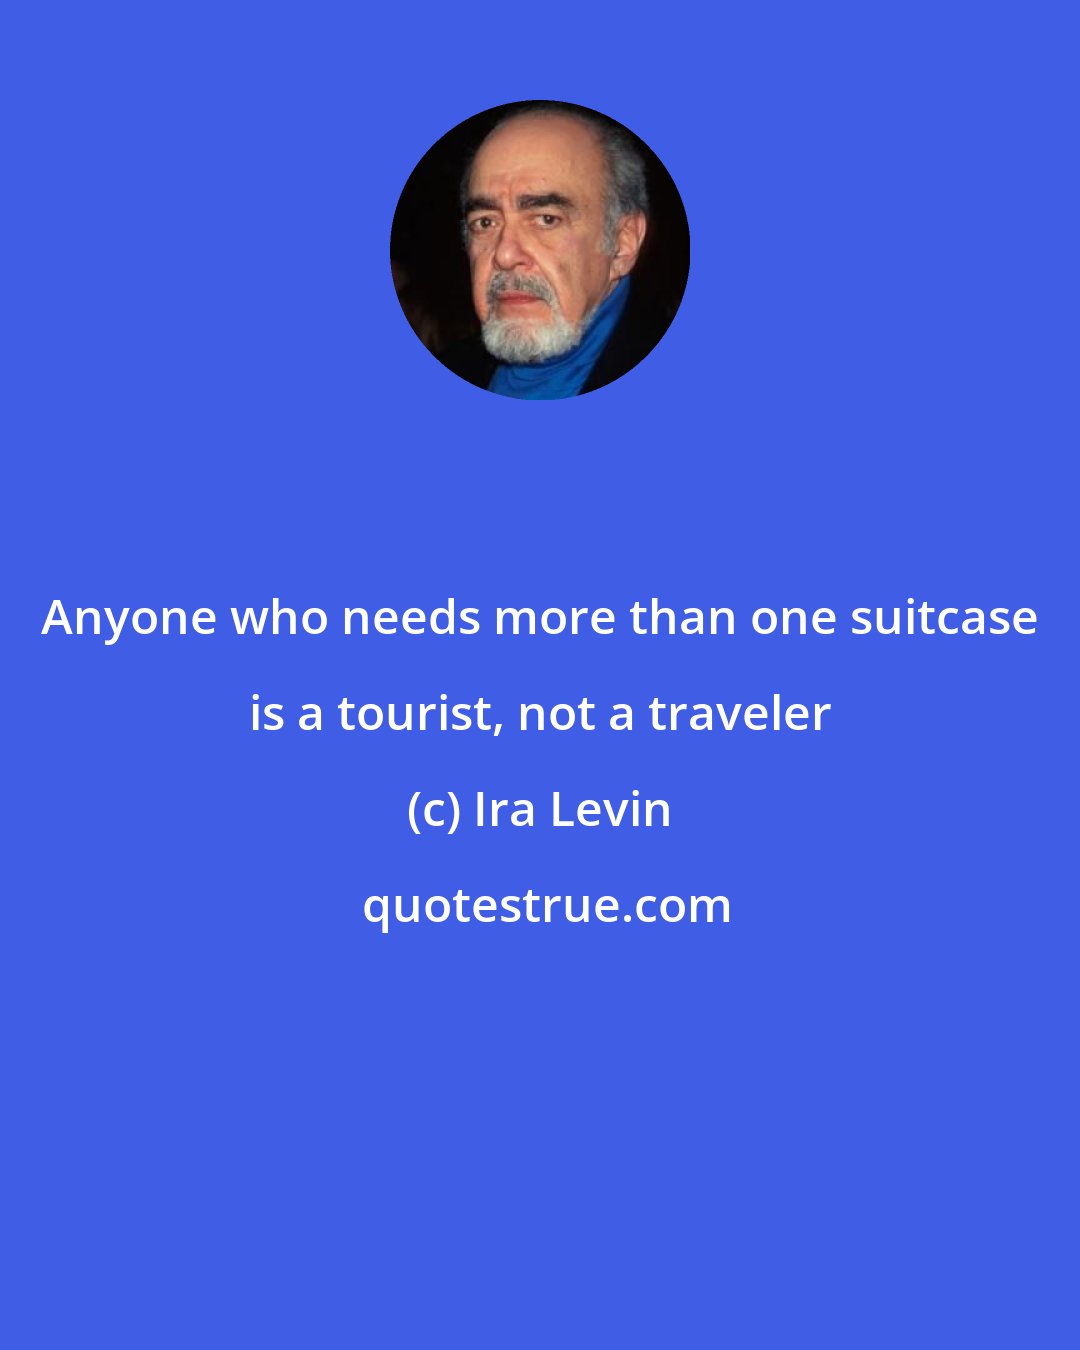 Ira Levin: Anyone who needs more than one suitcase is a tourist, not a traveler